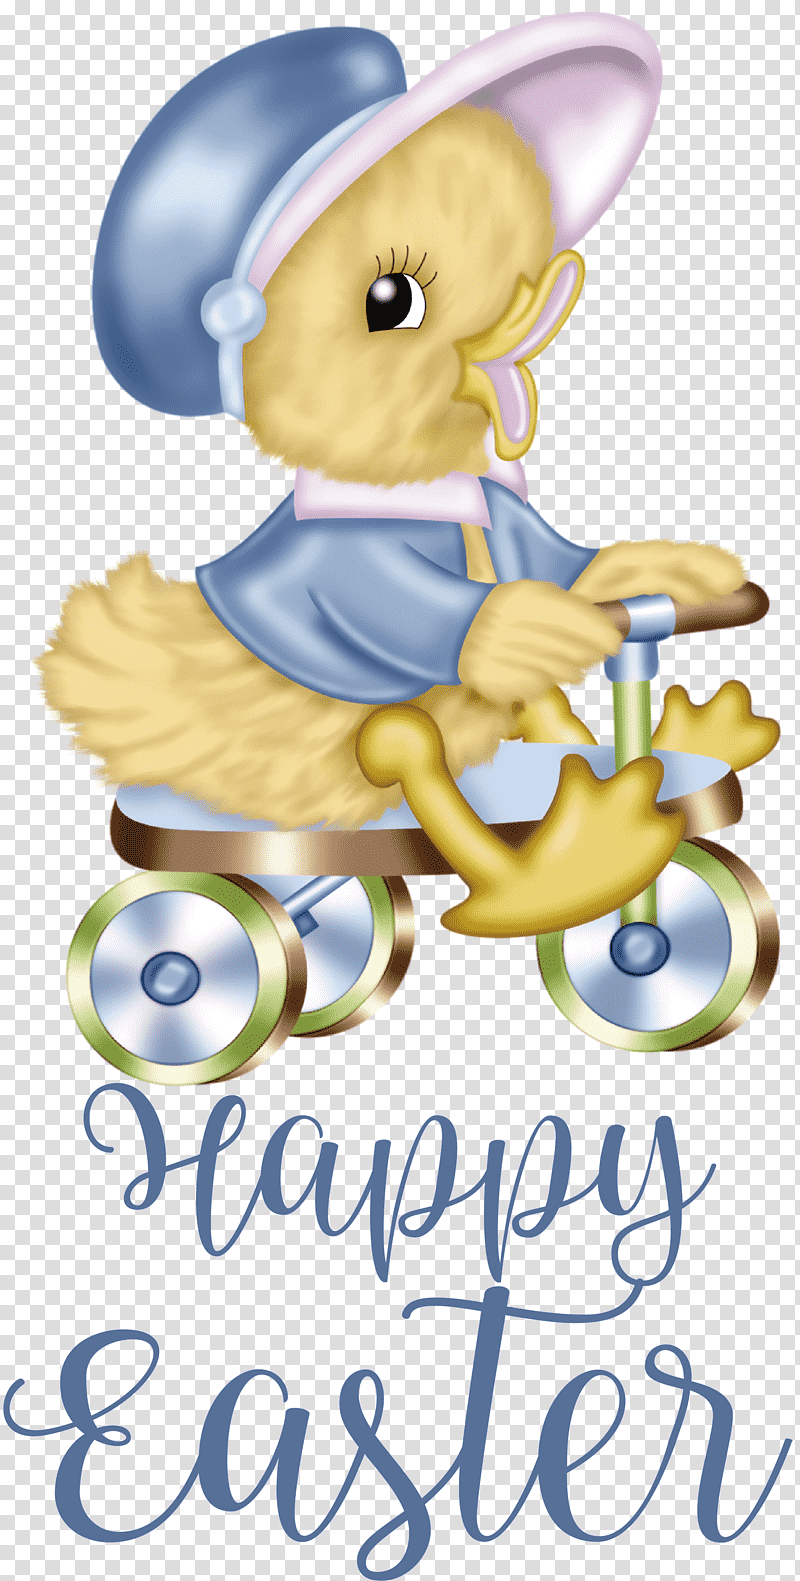 Happy Easter chicken and ducklings, Cartoon, Easter Bunny, Character, Drawing, Cartoon M, Ruette Des Delisles transparent background PNG clipart